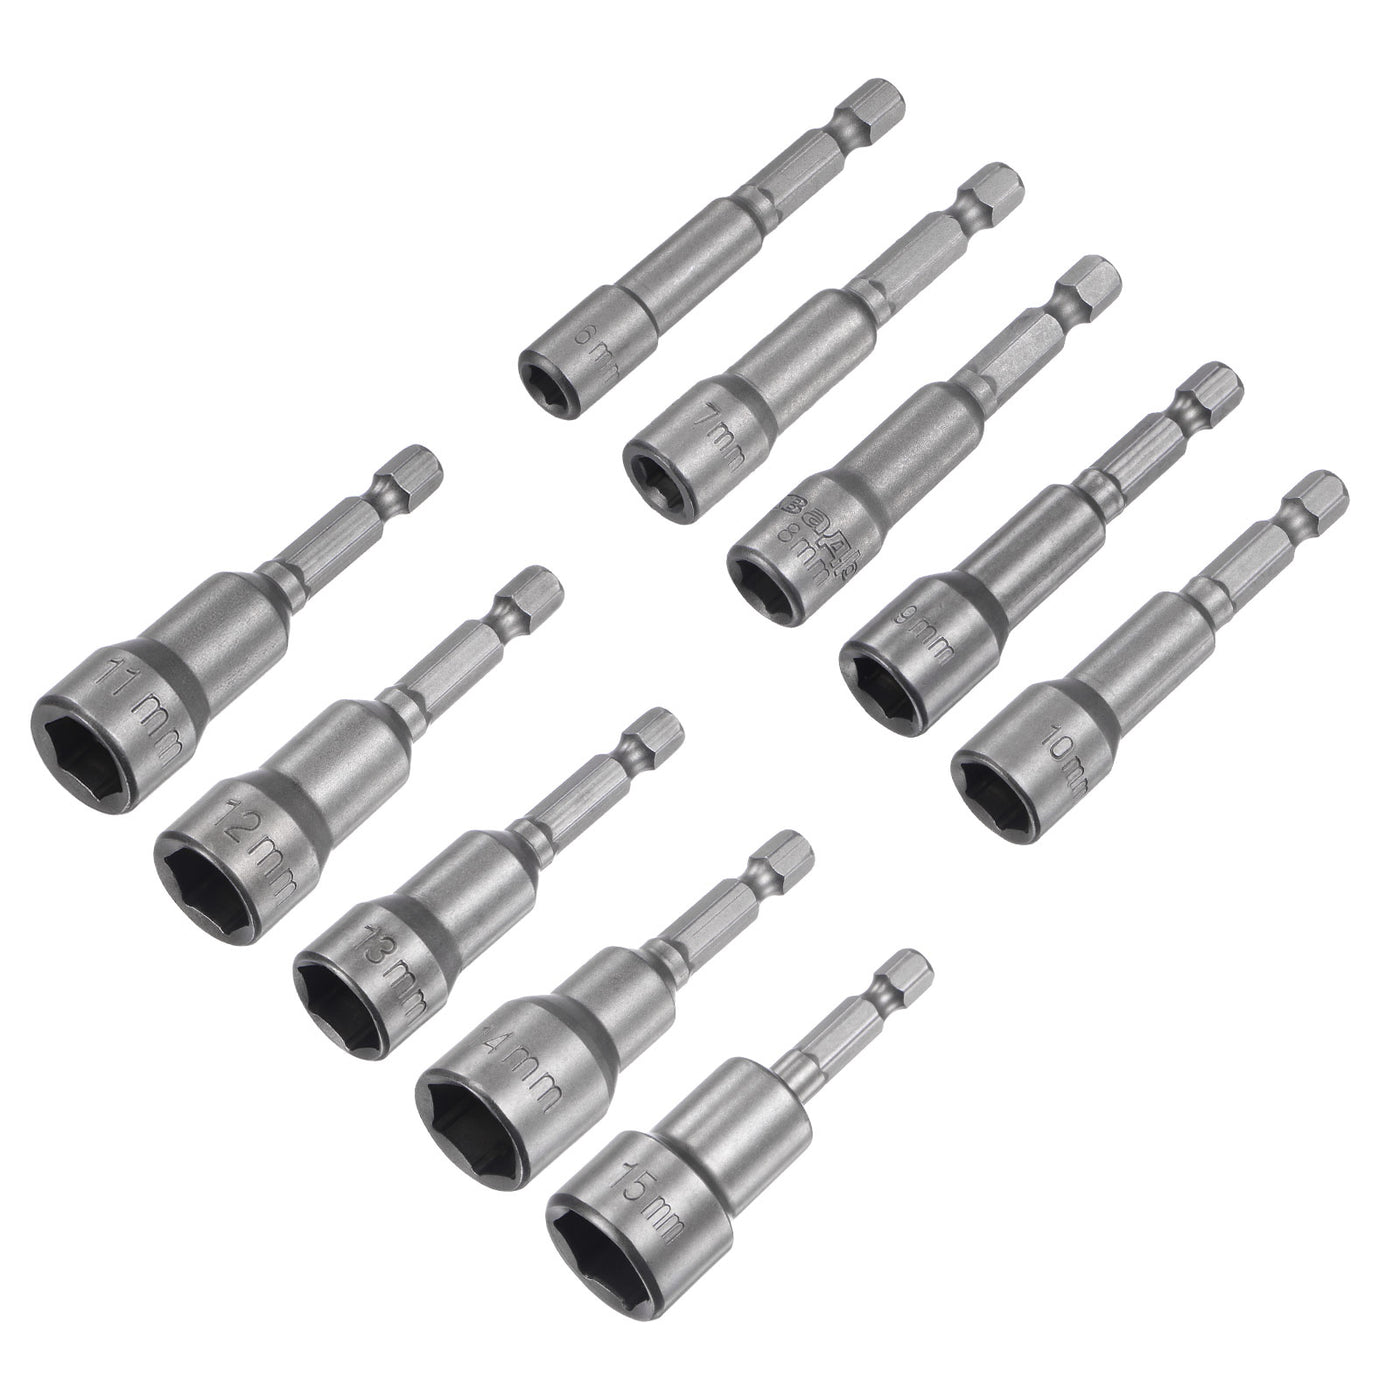 uxcell Uxcell 1/4" Quick-Change Hex Shank 6-15mm Magnetic Nut Driver Bit Set of 10 Piece, CR-V